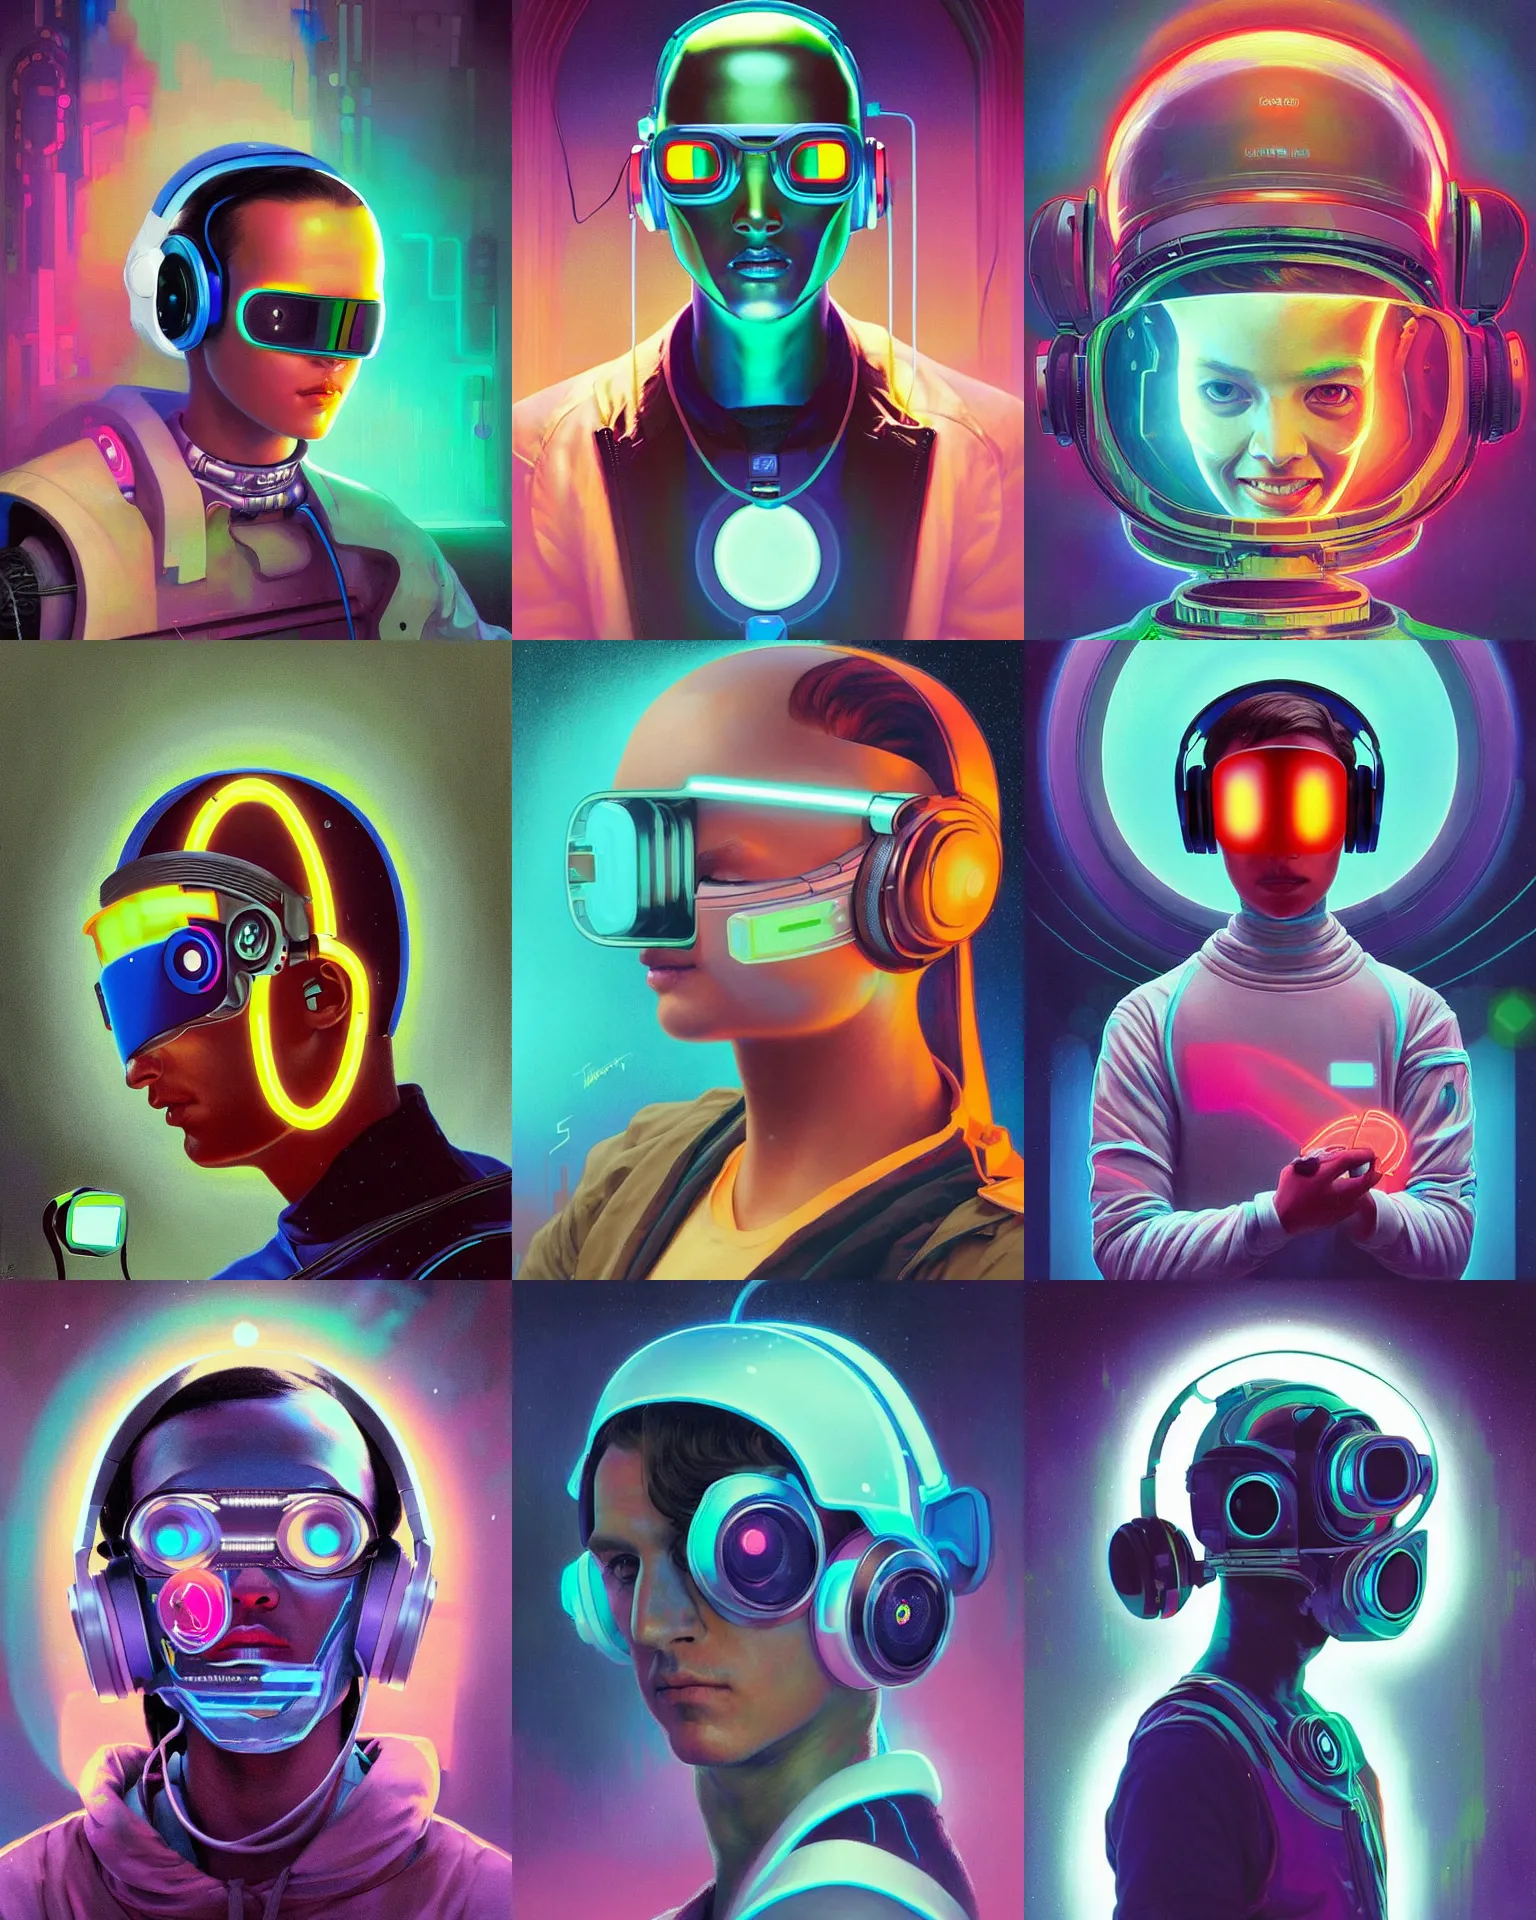 Prompt: future coder looking on, cyclops visor over eyes and sleek electric headphones, bismuth gradient tech data neon accents, desaturated headshot portrait painting by dean cornwall, ilya repin, rhads, tom whalen, alex grey, alphonse mucha, donoto giancola, astronaut cyberpunk electric fashion photography